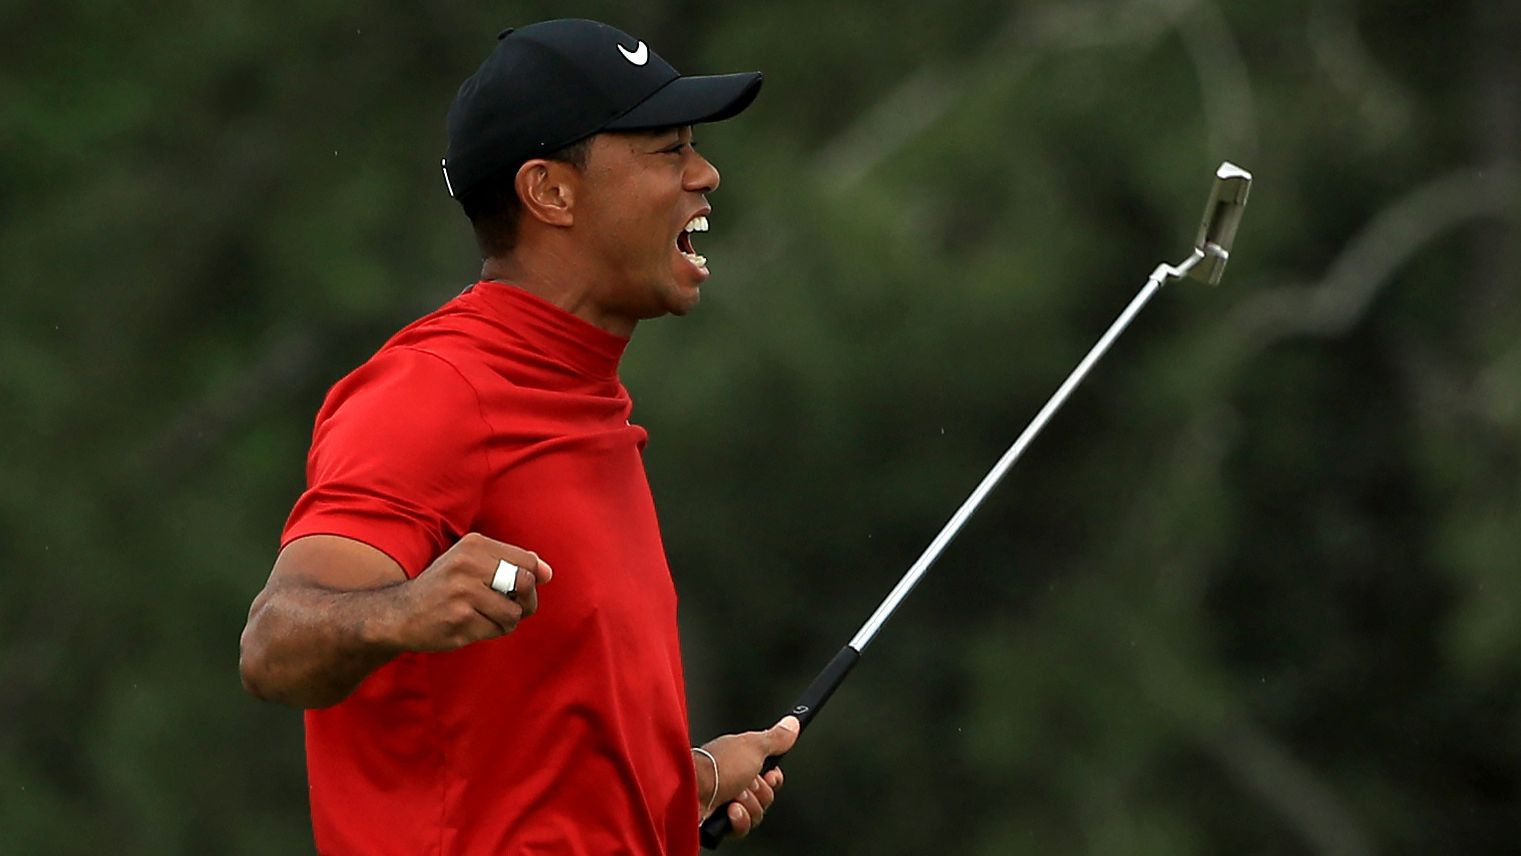 'I'm ready': Tiger Woods launches new apparel brand after Nike split